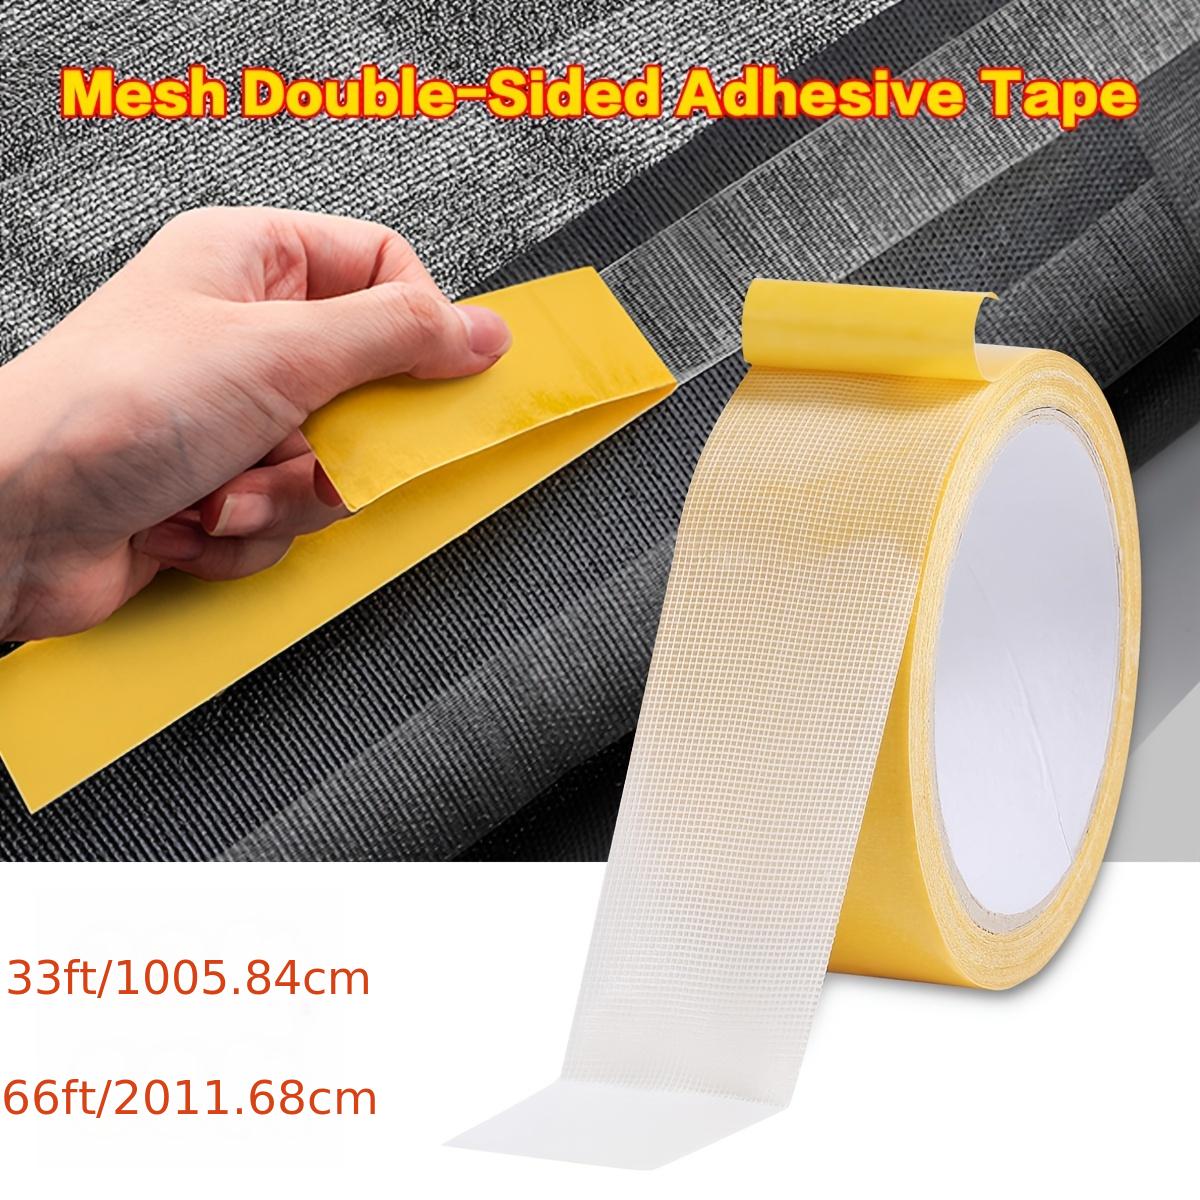 Dress Tape, Double-Sided and Clothes Friendly Adhesive Tape to Keep